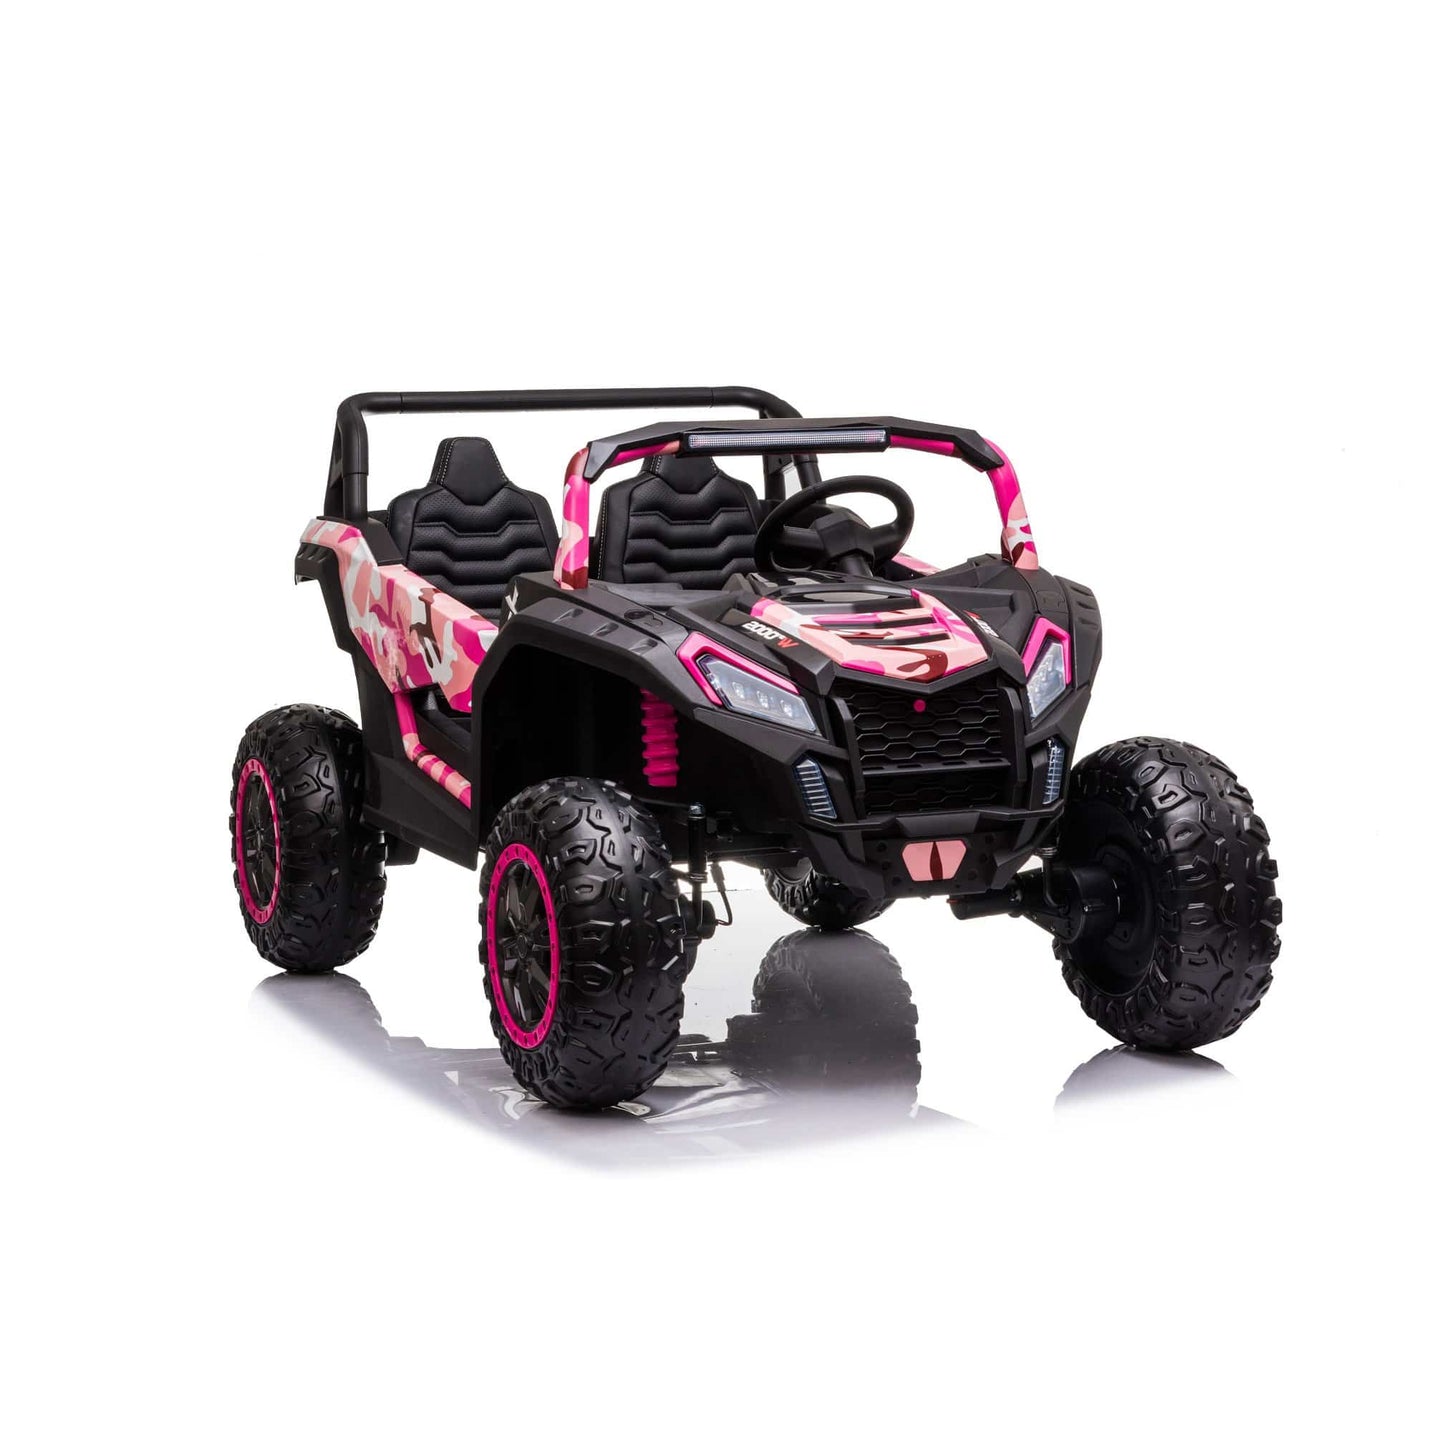 24V 4x4 Freddo Toys Dune Buggy 2 Seater Ride on with Parental Remote Control for 3+ Years (Cammo Pink)